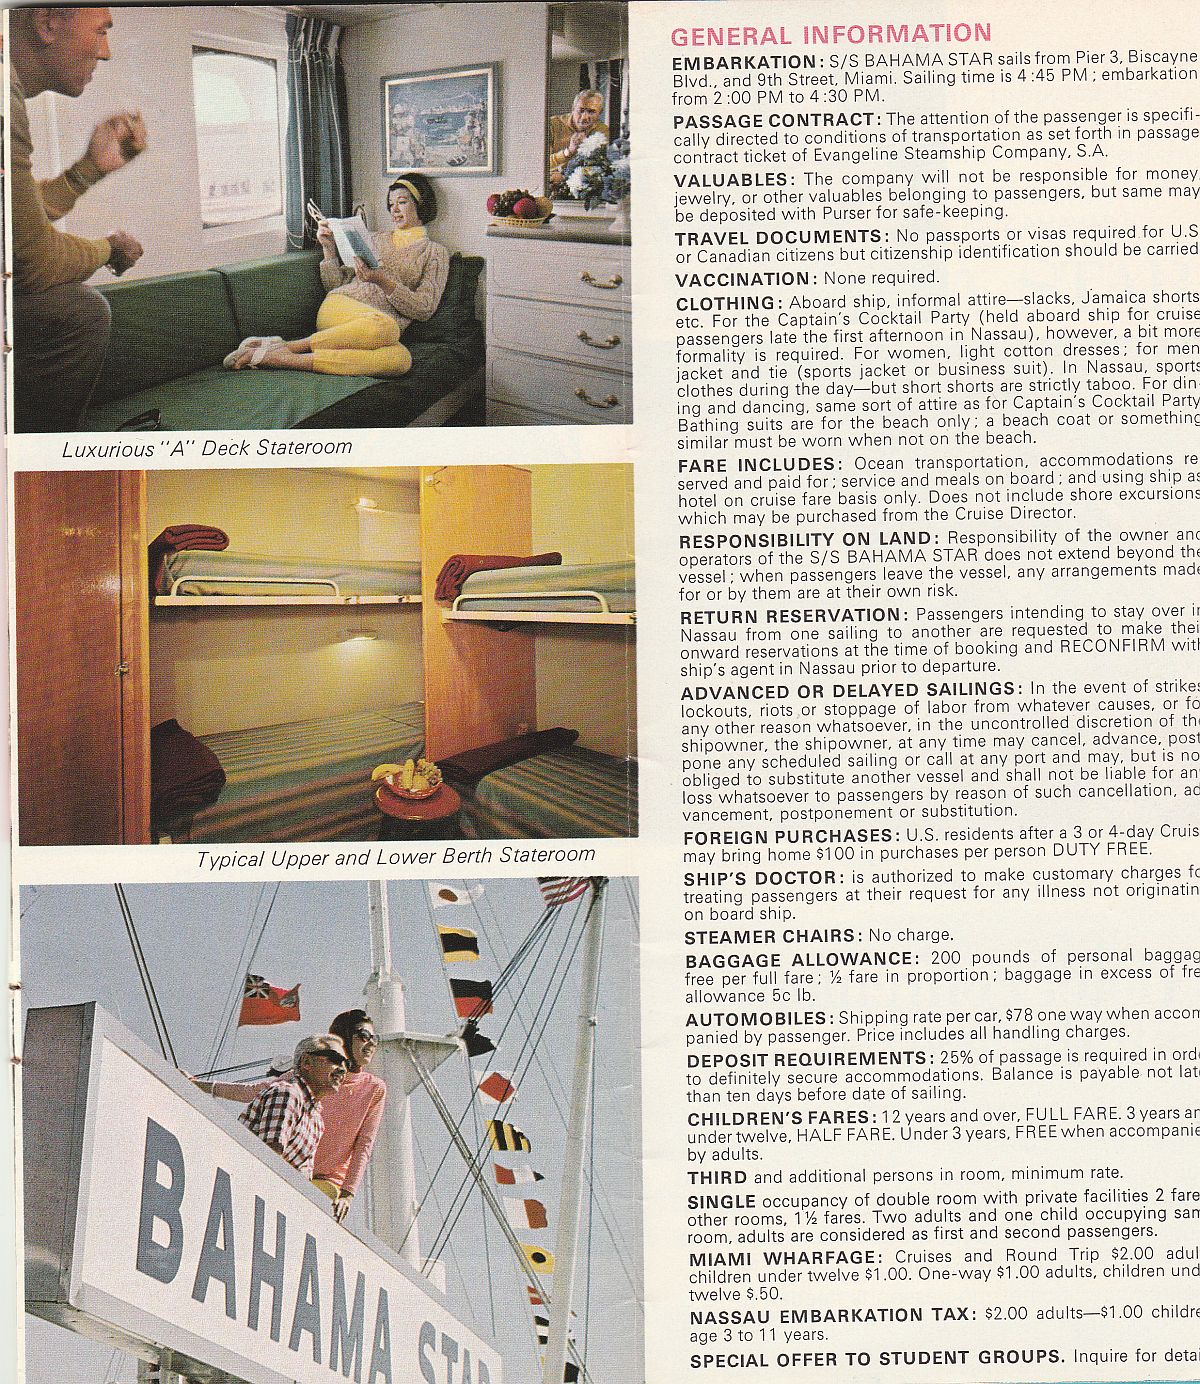 ss Bahama Star Staterooms & General Information: Typical staterooms and embarkation, tickets, clothing, etc.